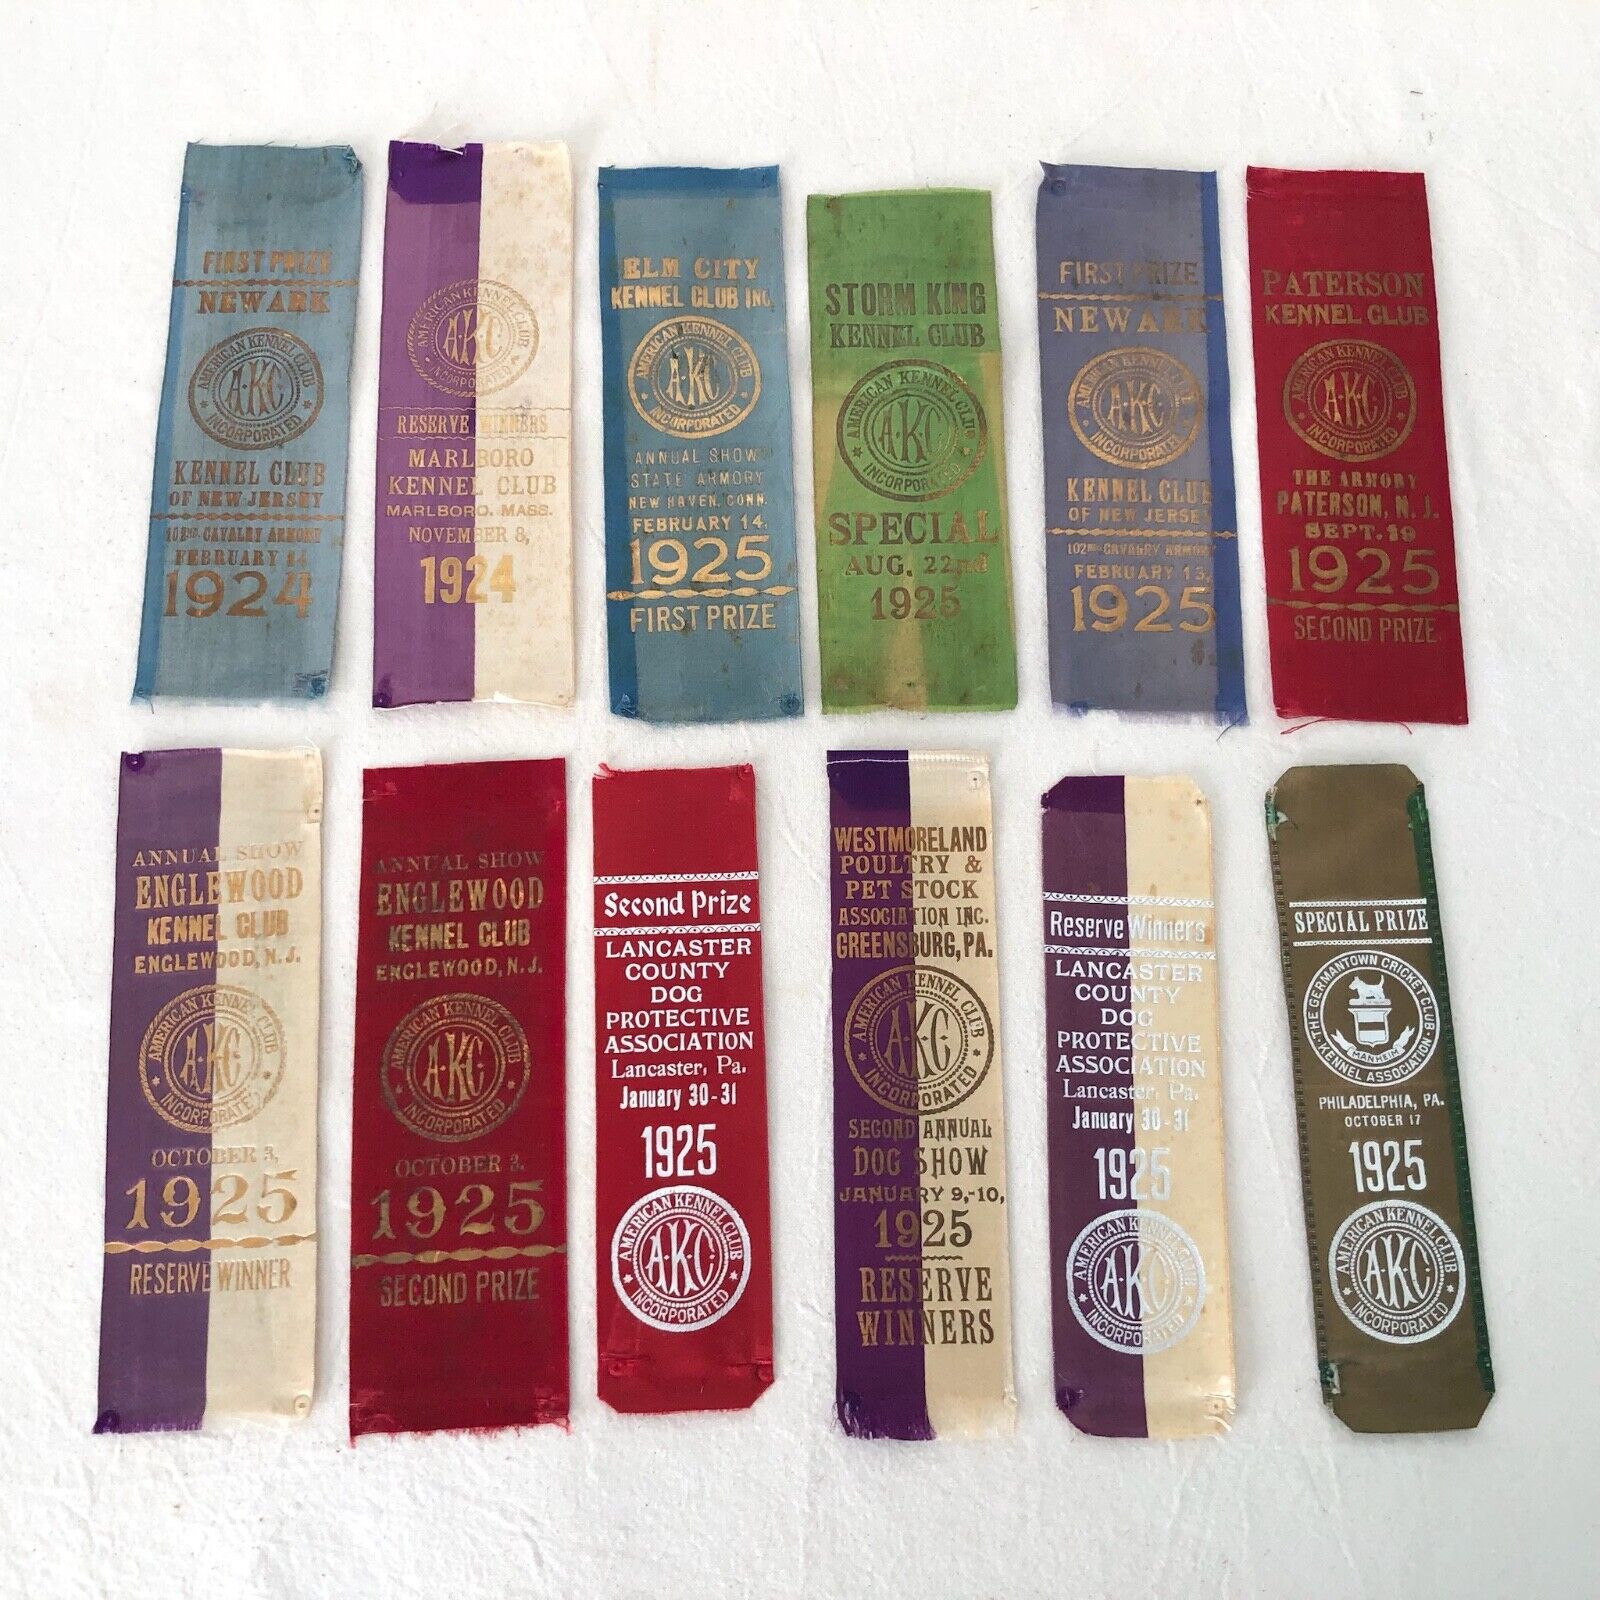 Antique 1924 & 1925 AKC - American Kennel Club Award Prize Ribbons Lot of 12